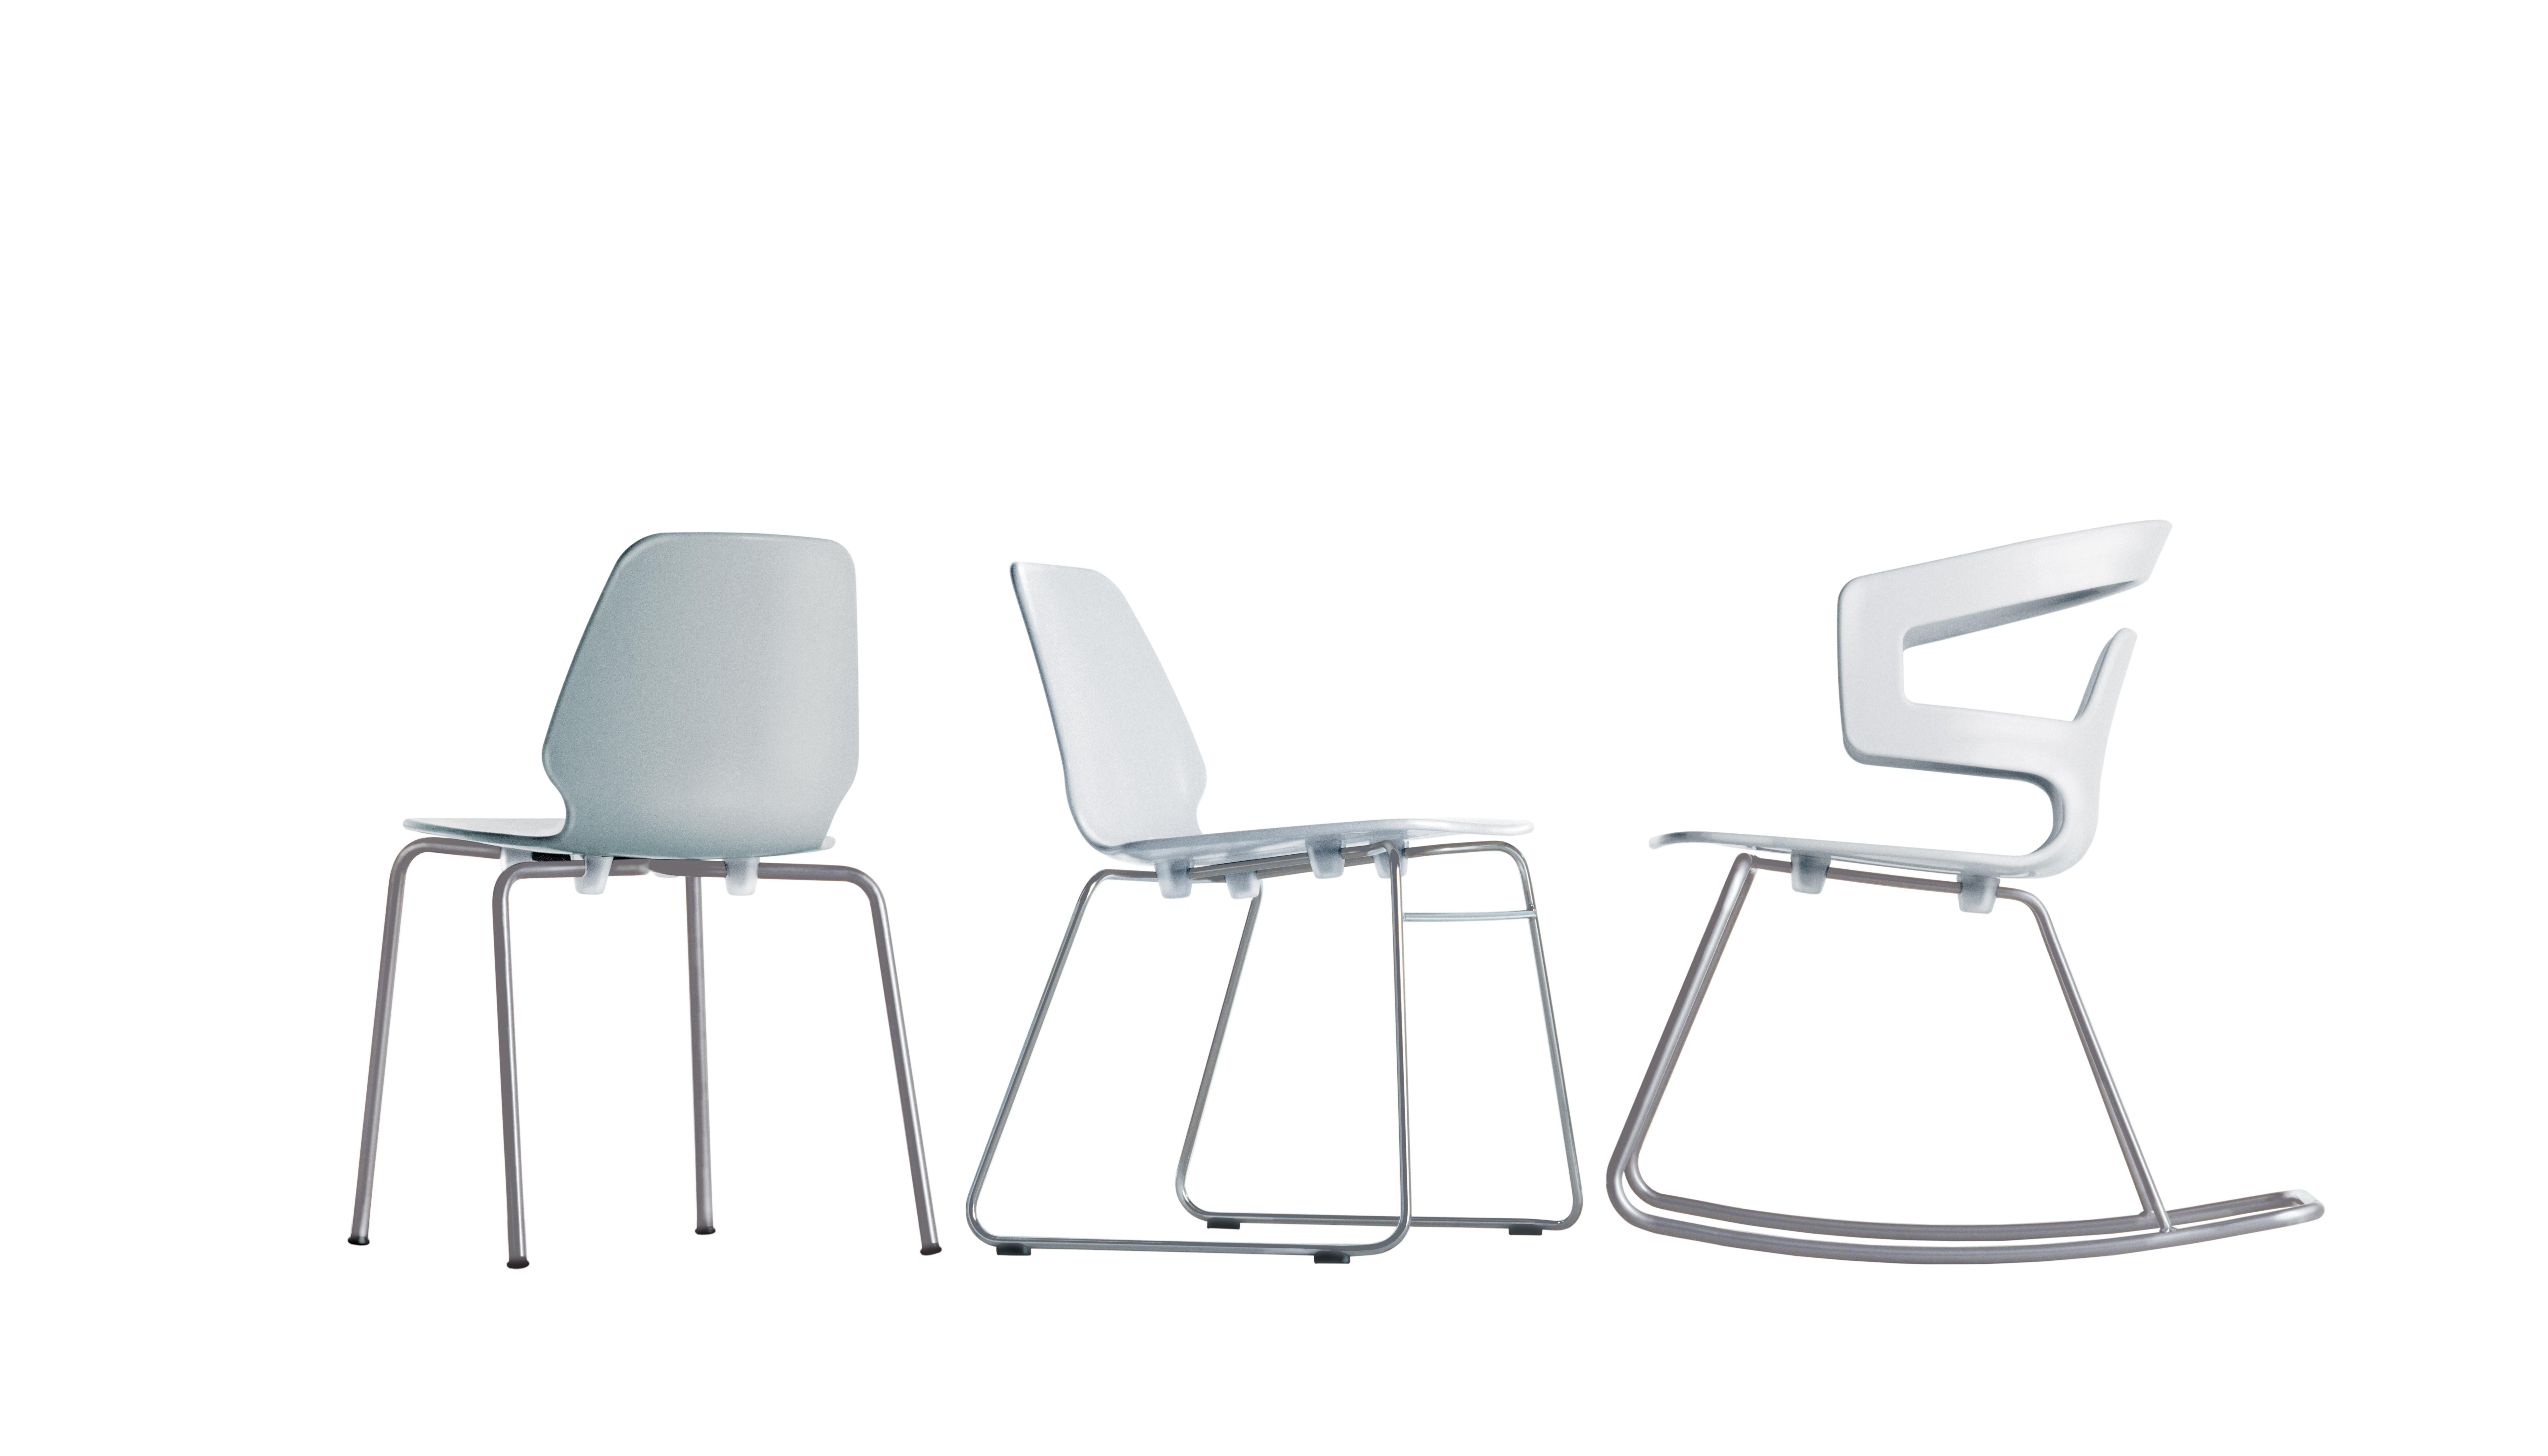 Alias 531 Selinunte Sledge Chair in White Seat and Lacquered Steel Frame In New Condition For Sale In Brooklyn, NY